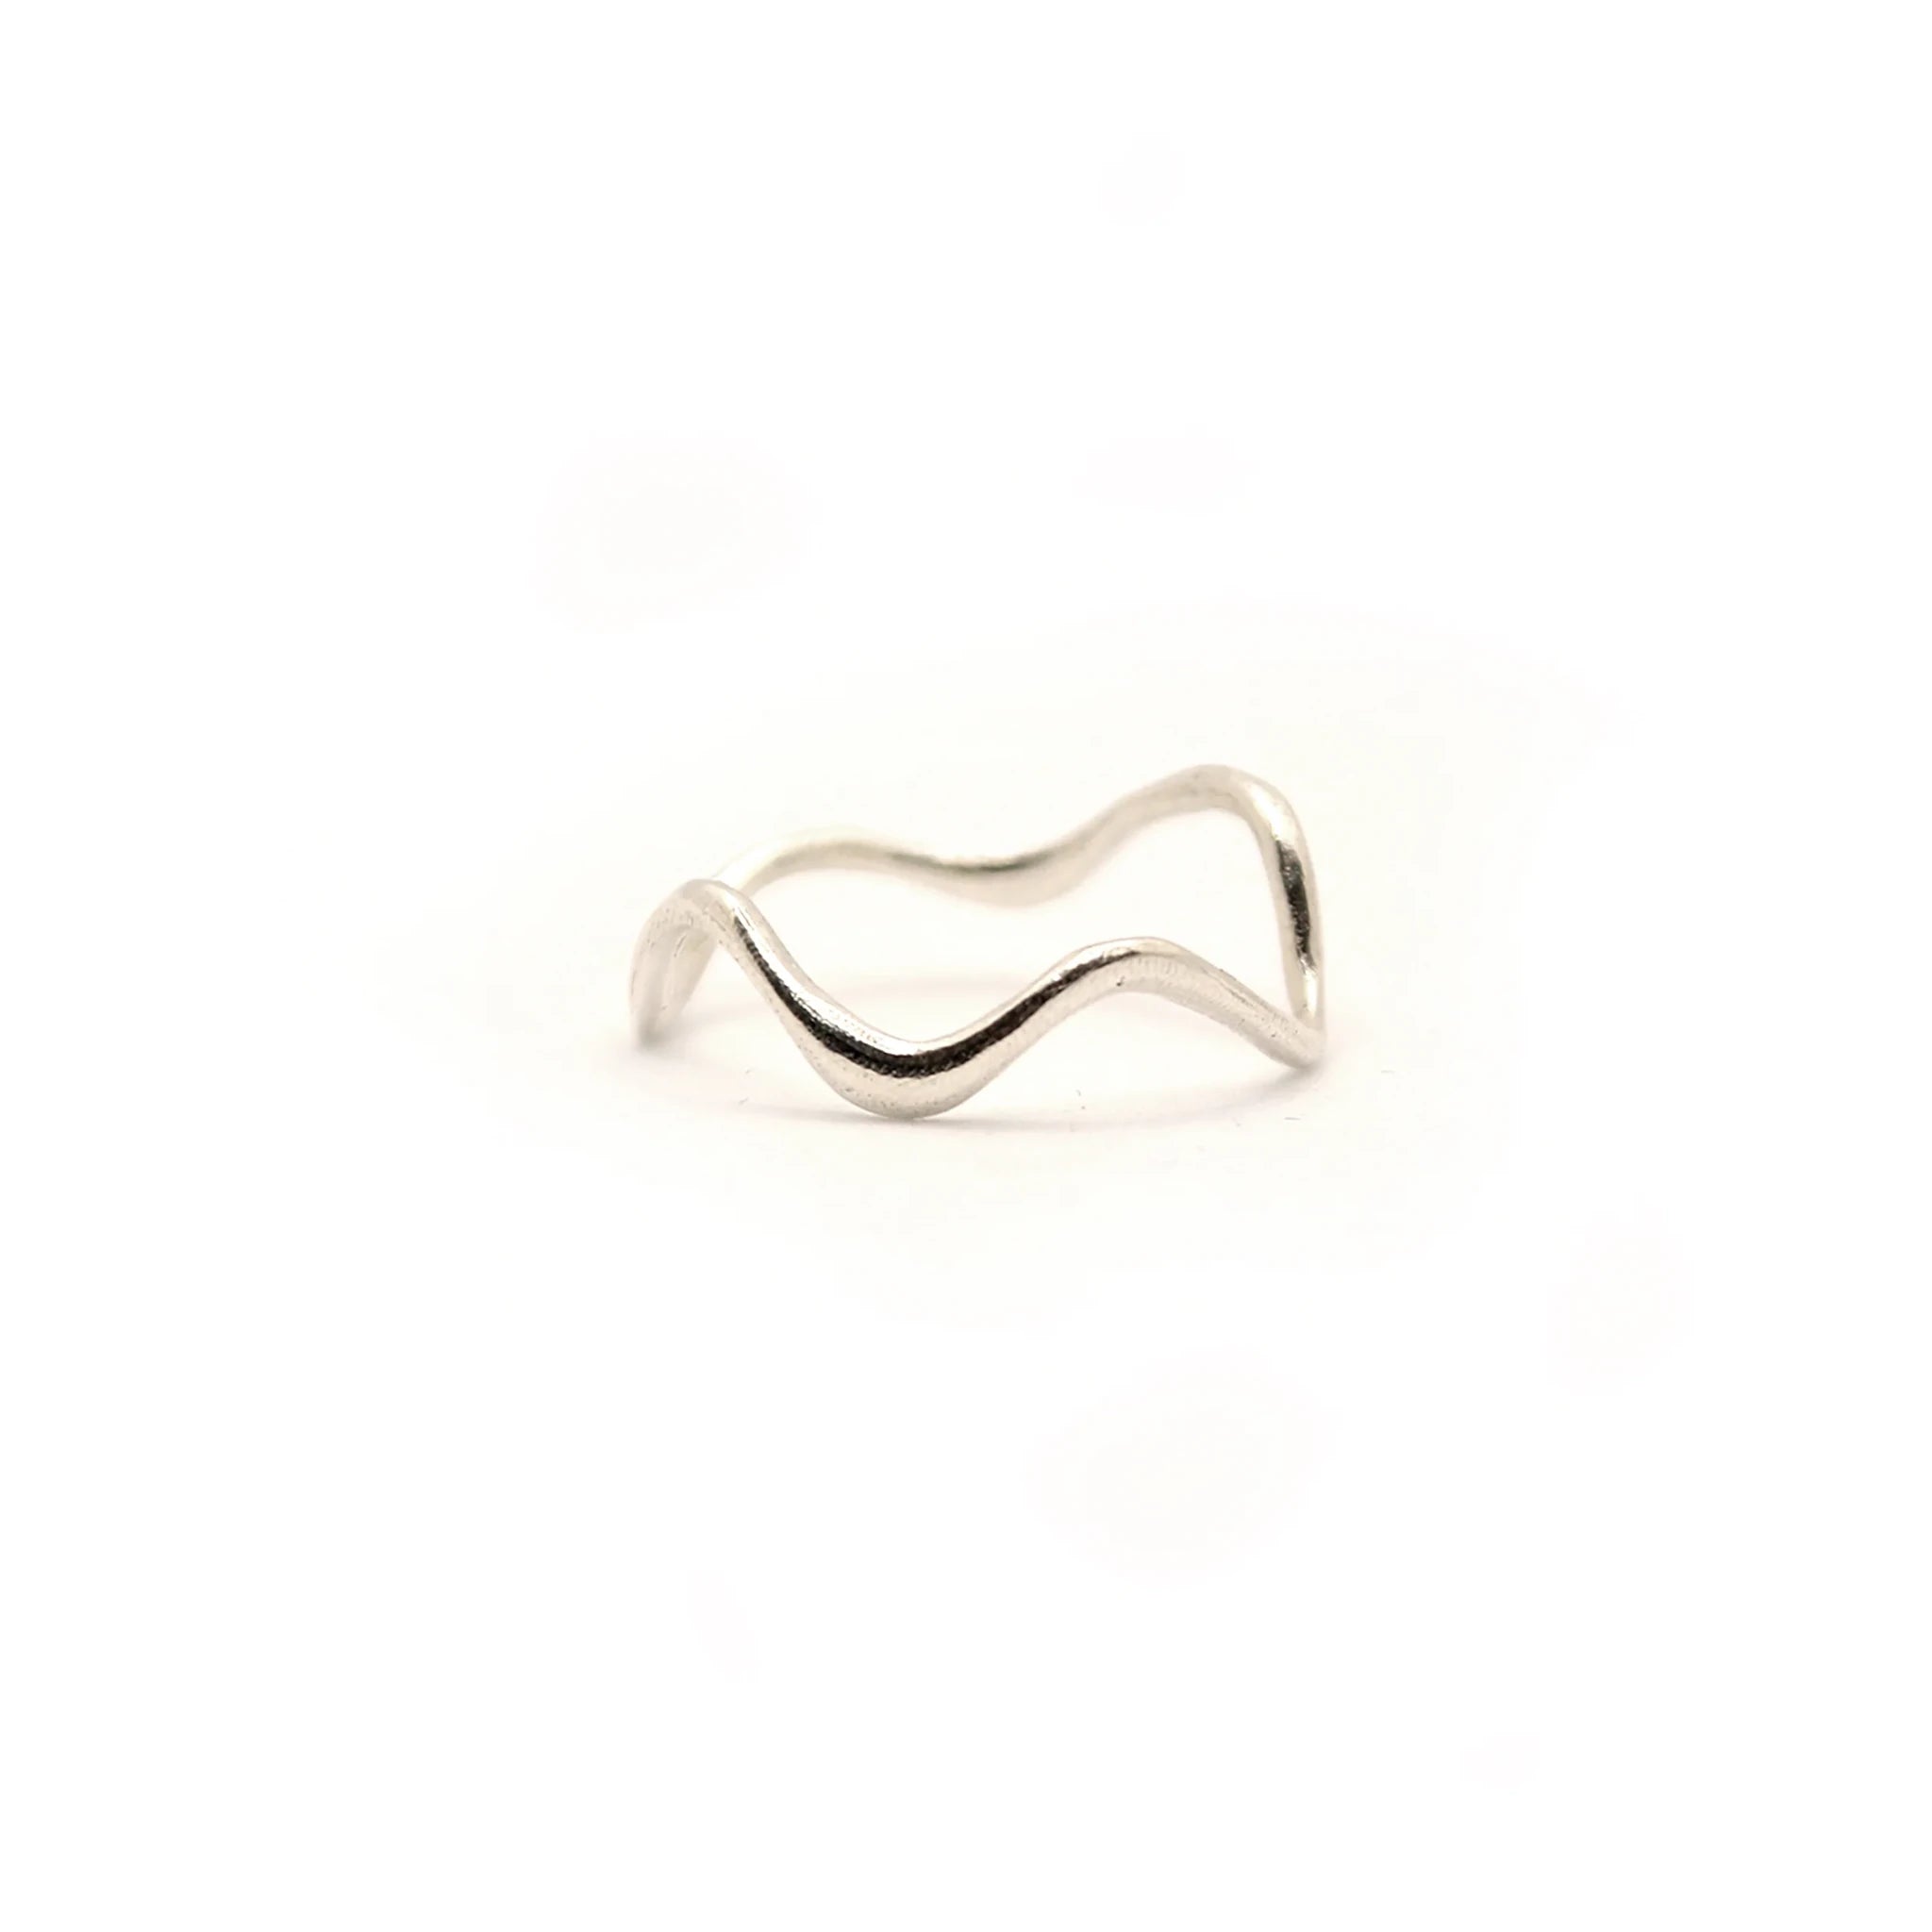 Saccostrea Ring in Silver or Gold by Hannah Bourn - Lifestory